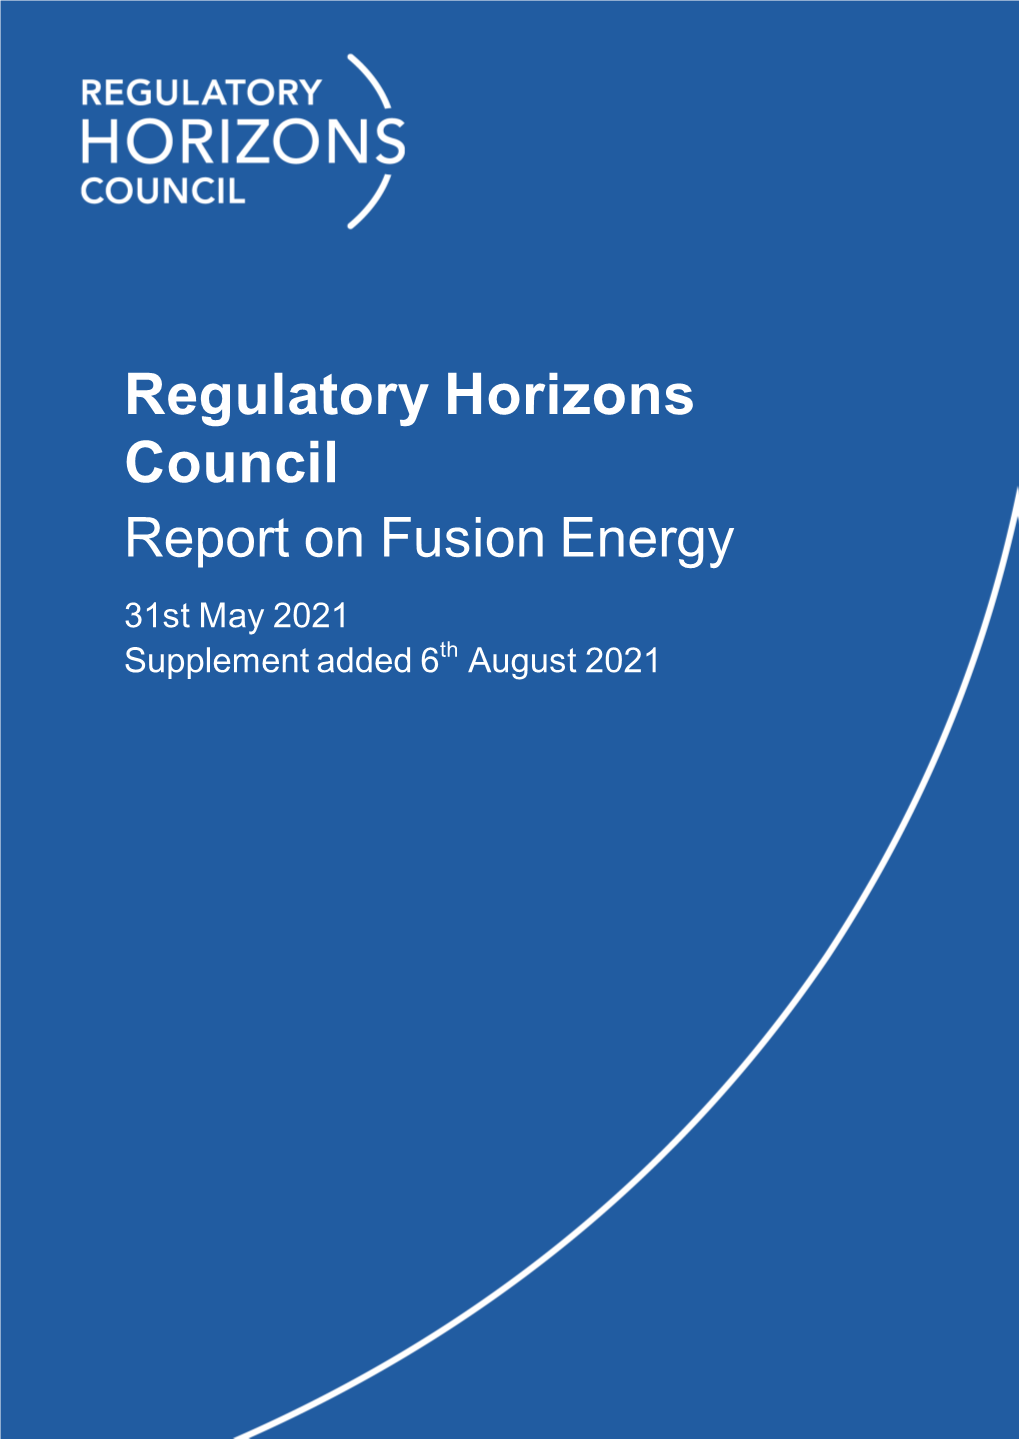 RHC Report on Fusion Energy 2021